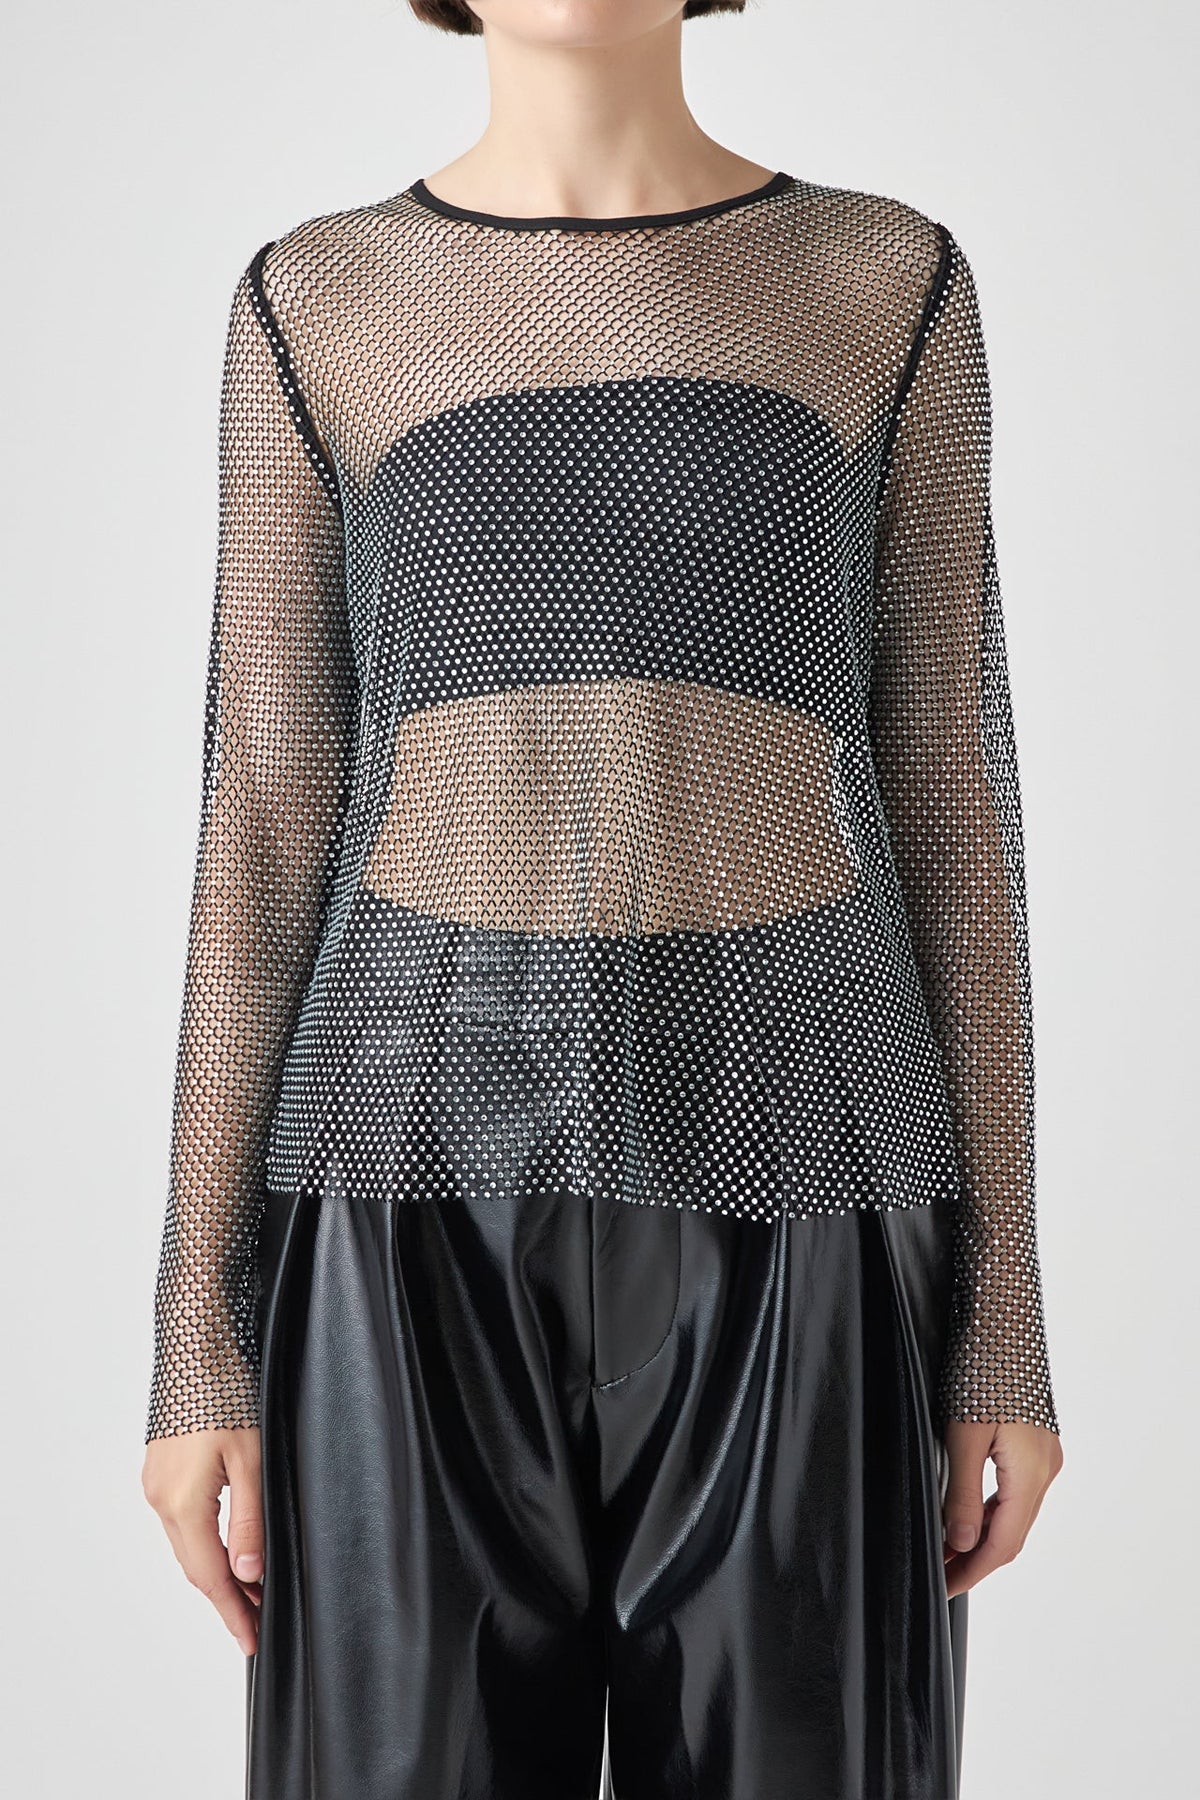 GREY LAB - Rhinestone Long Sleeve Top - TOPS available at Objectrare